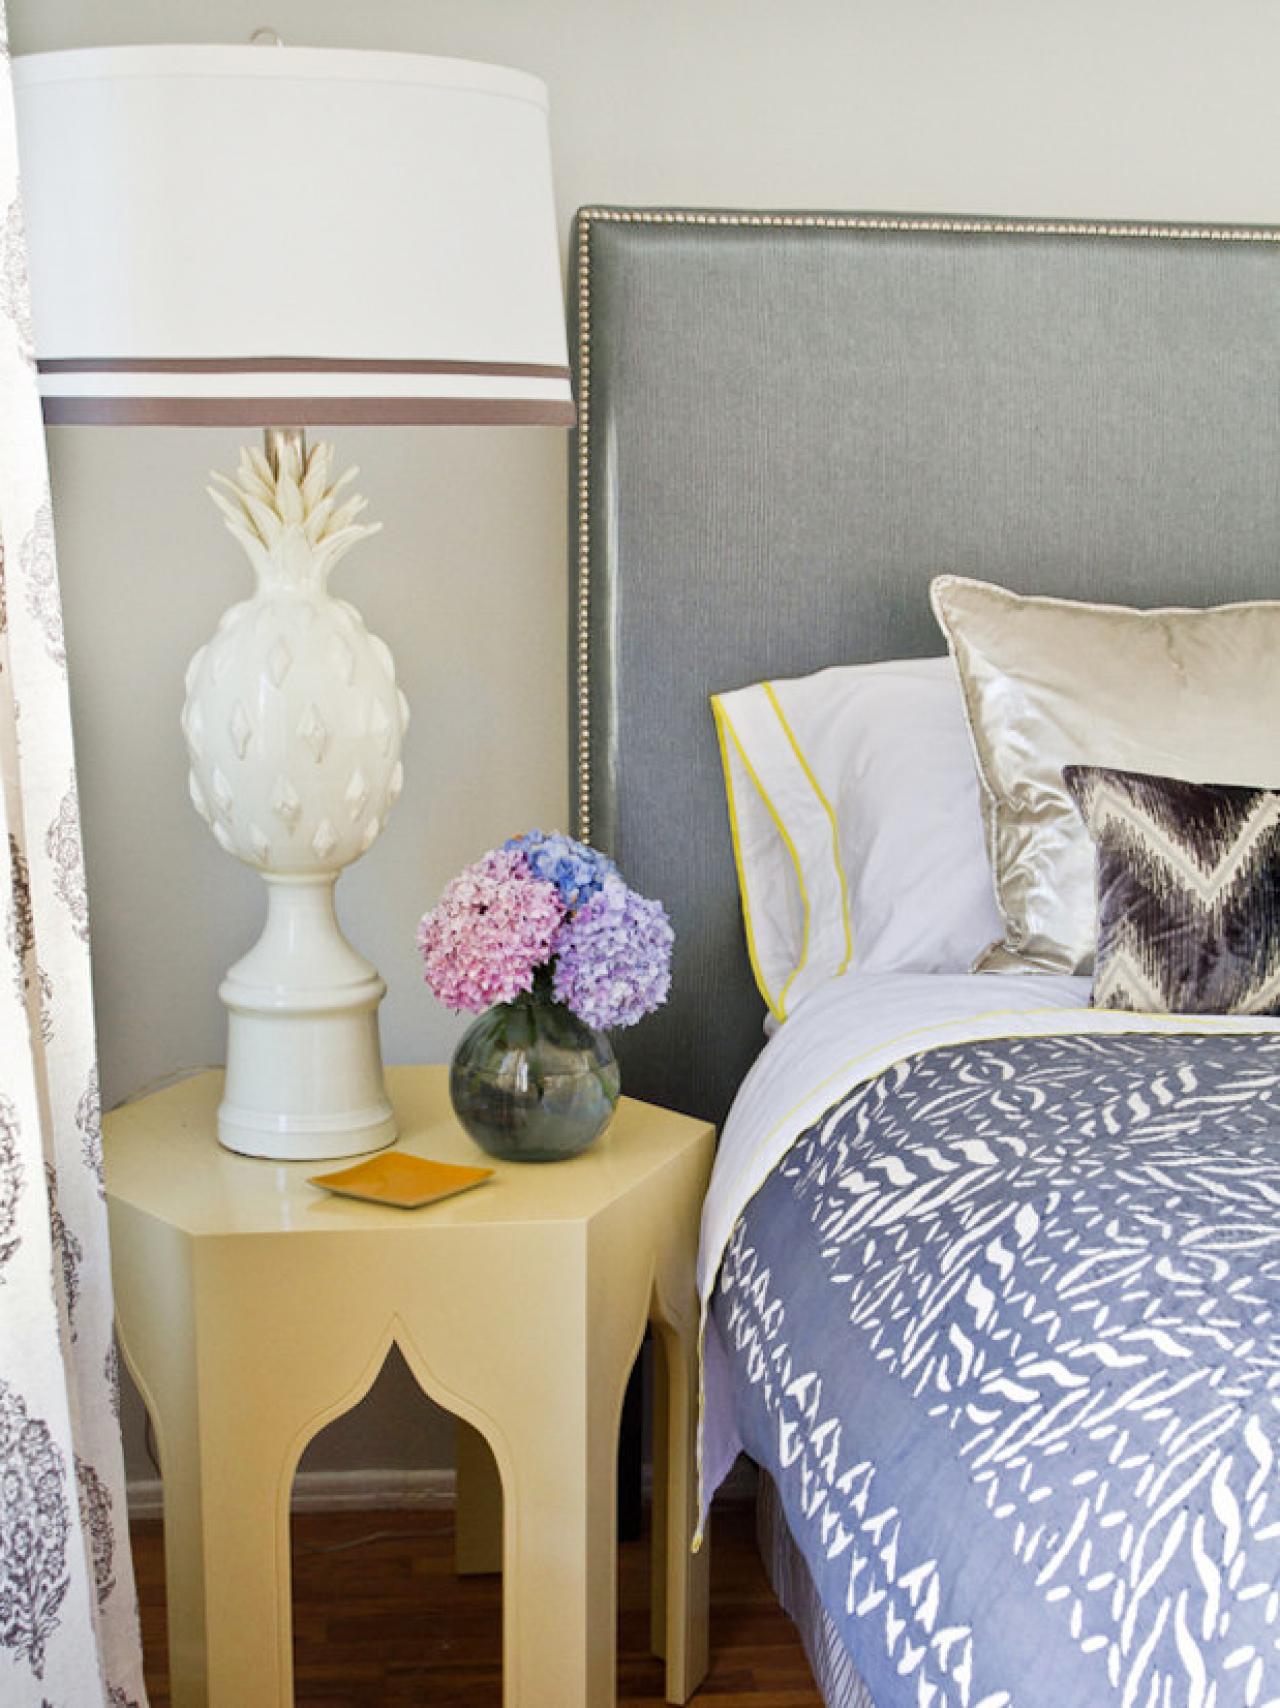 How To Upholster A No Sew Headboard Hgtv